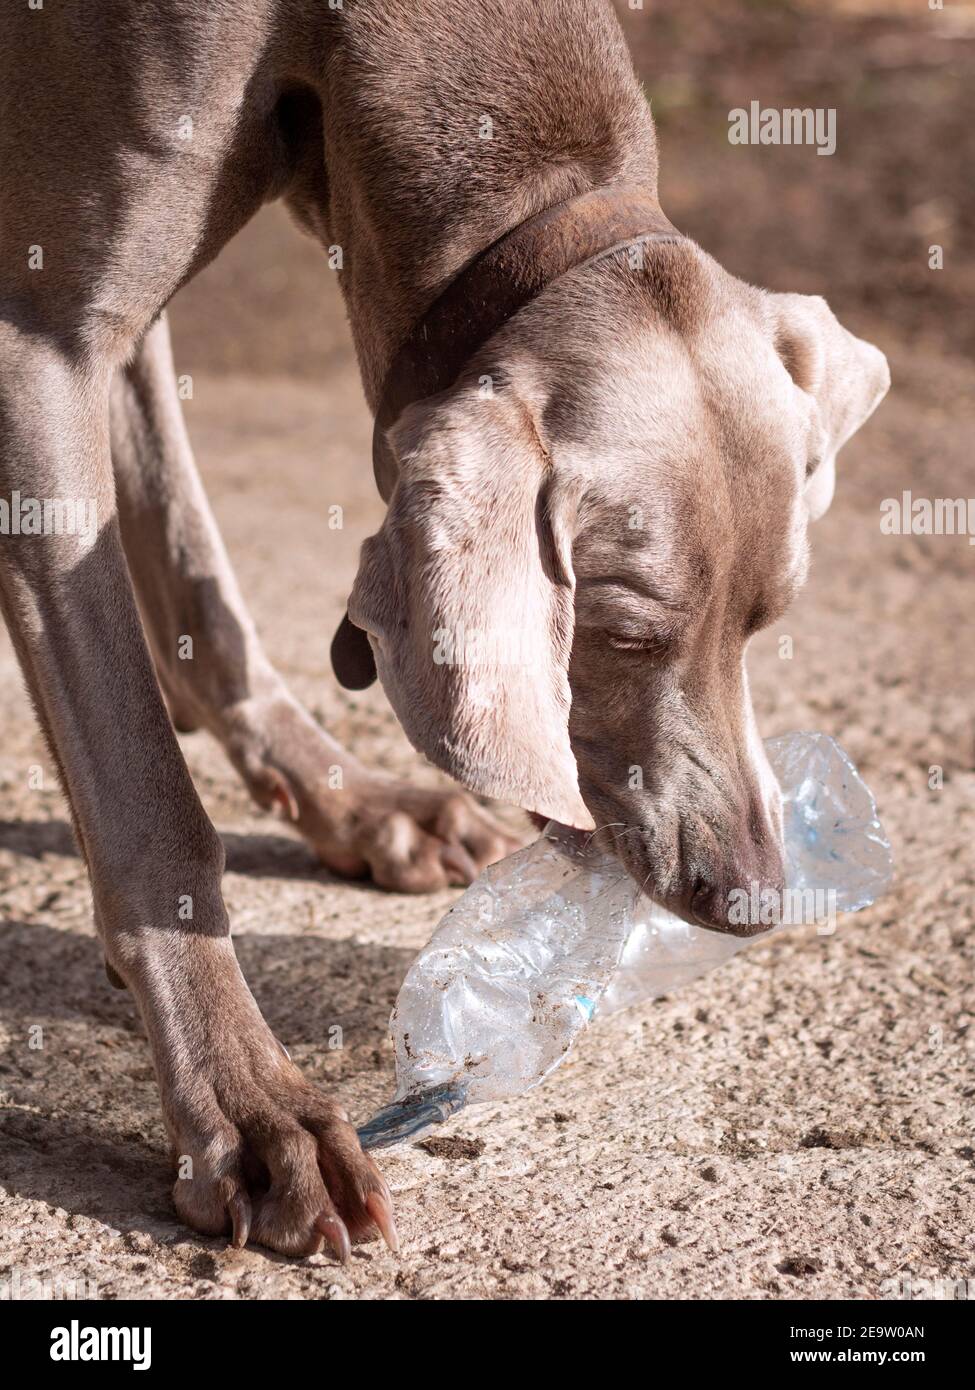 Weimaraner dog playing biting a plastic bottle in the outside. Stock Photo